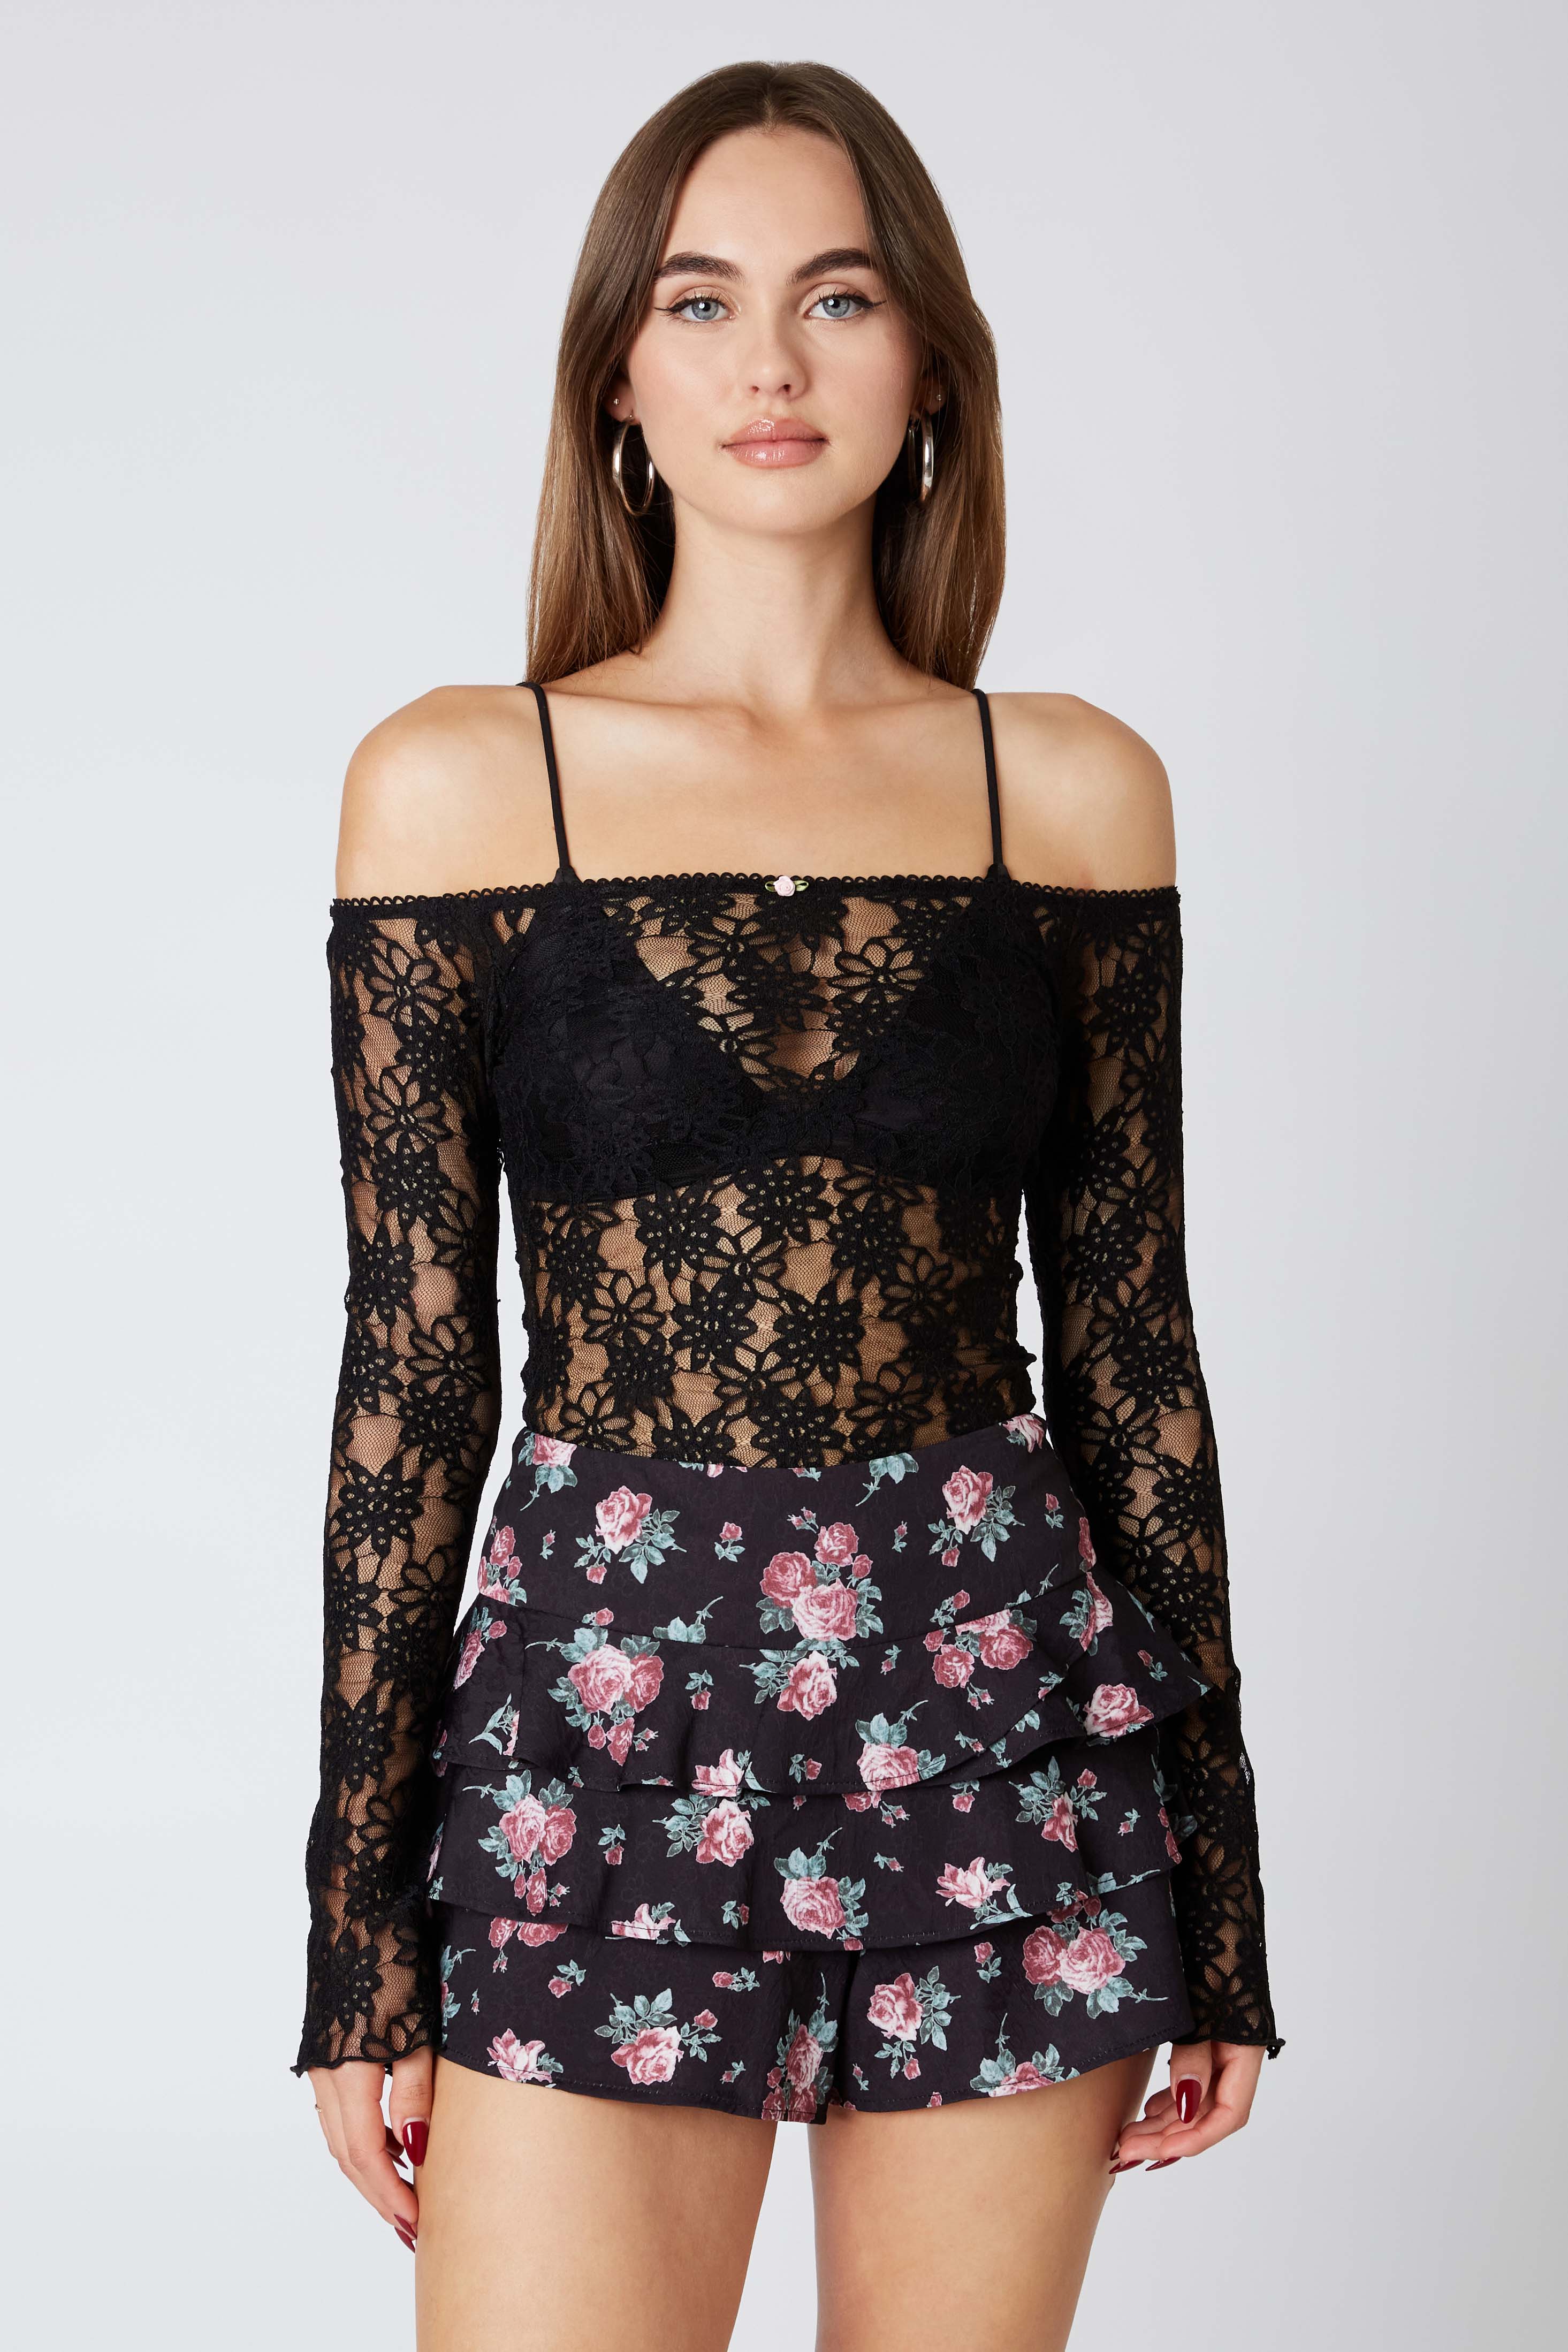 Ruffle Floral Skort in Black Front View